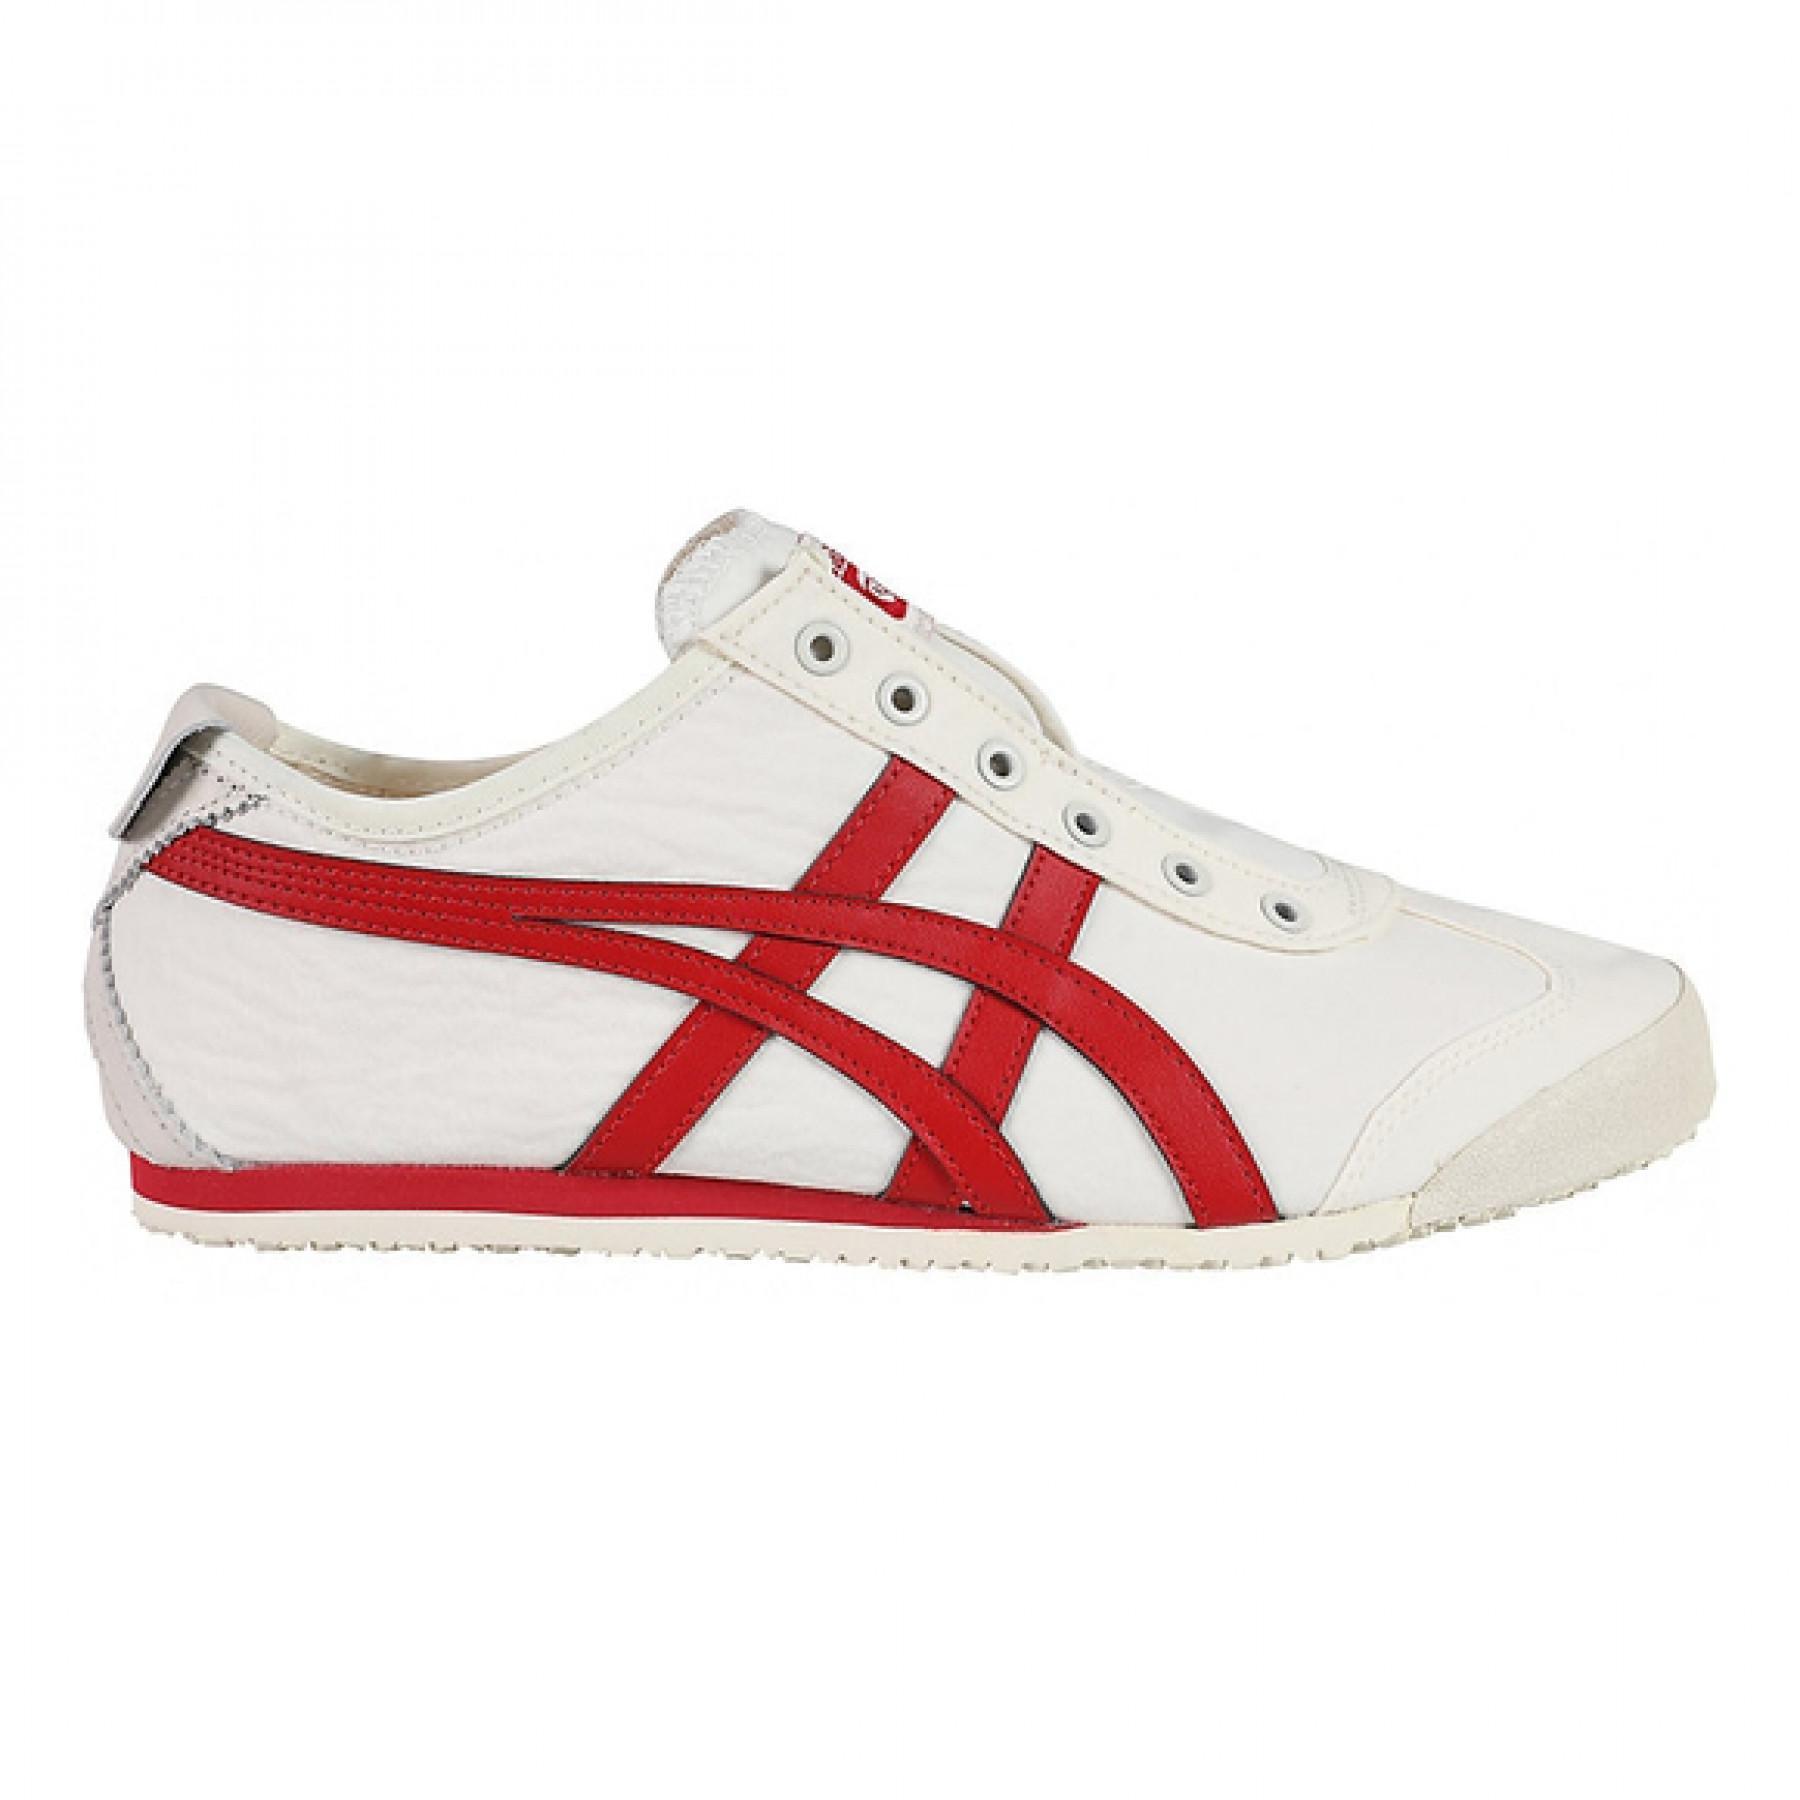 Sneakers Onitsuka Tiger Mexico 66 Slip-on - Others - Top Brands - Women